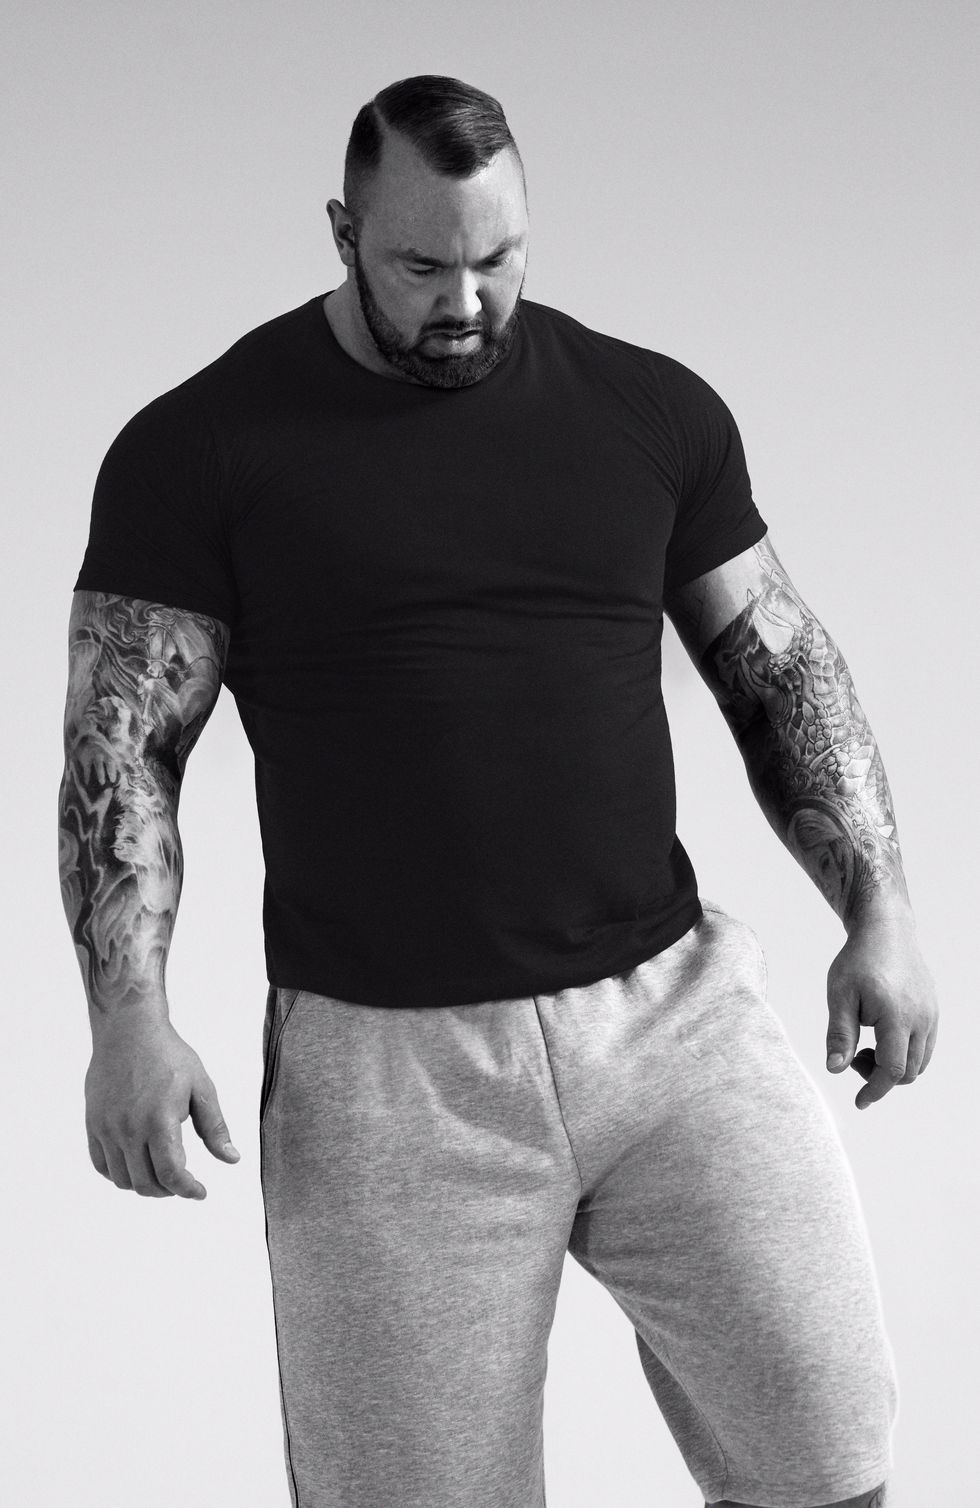 White, Black, Standing, Shoulder, Arm, T-shirt, Muscle, Facial hair, Model, Sleeve, 